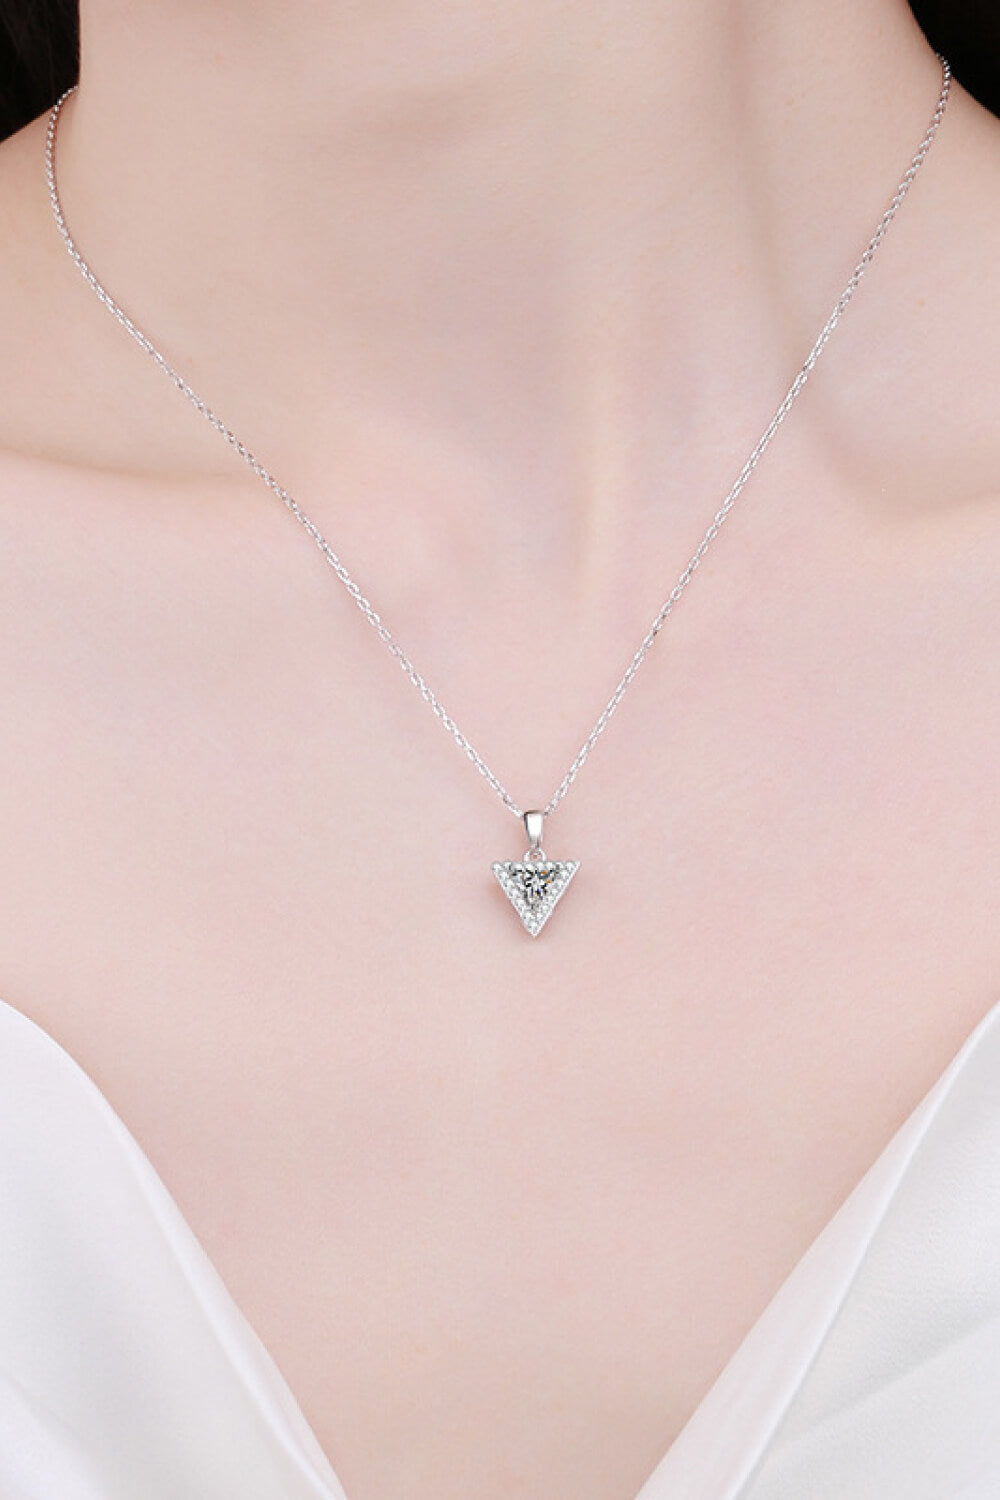 925 Sterling Silver Triangle Moissanite Pendant Necklace-Necklaces-Inspired by Justeen-Women's Clothing Boutique in Chicago, Illinois